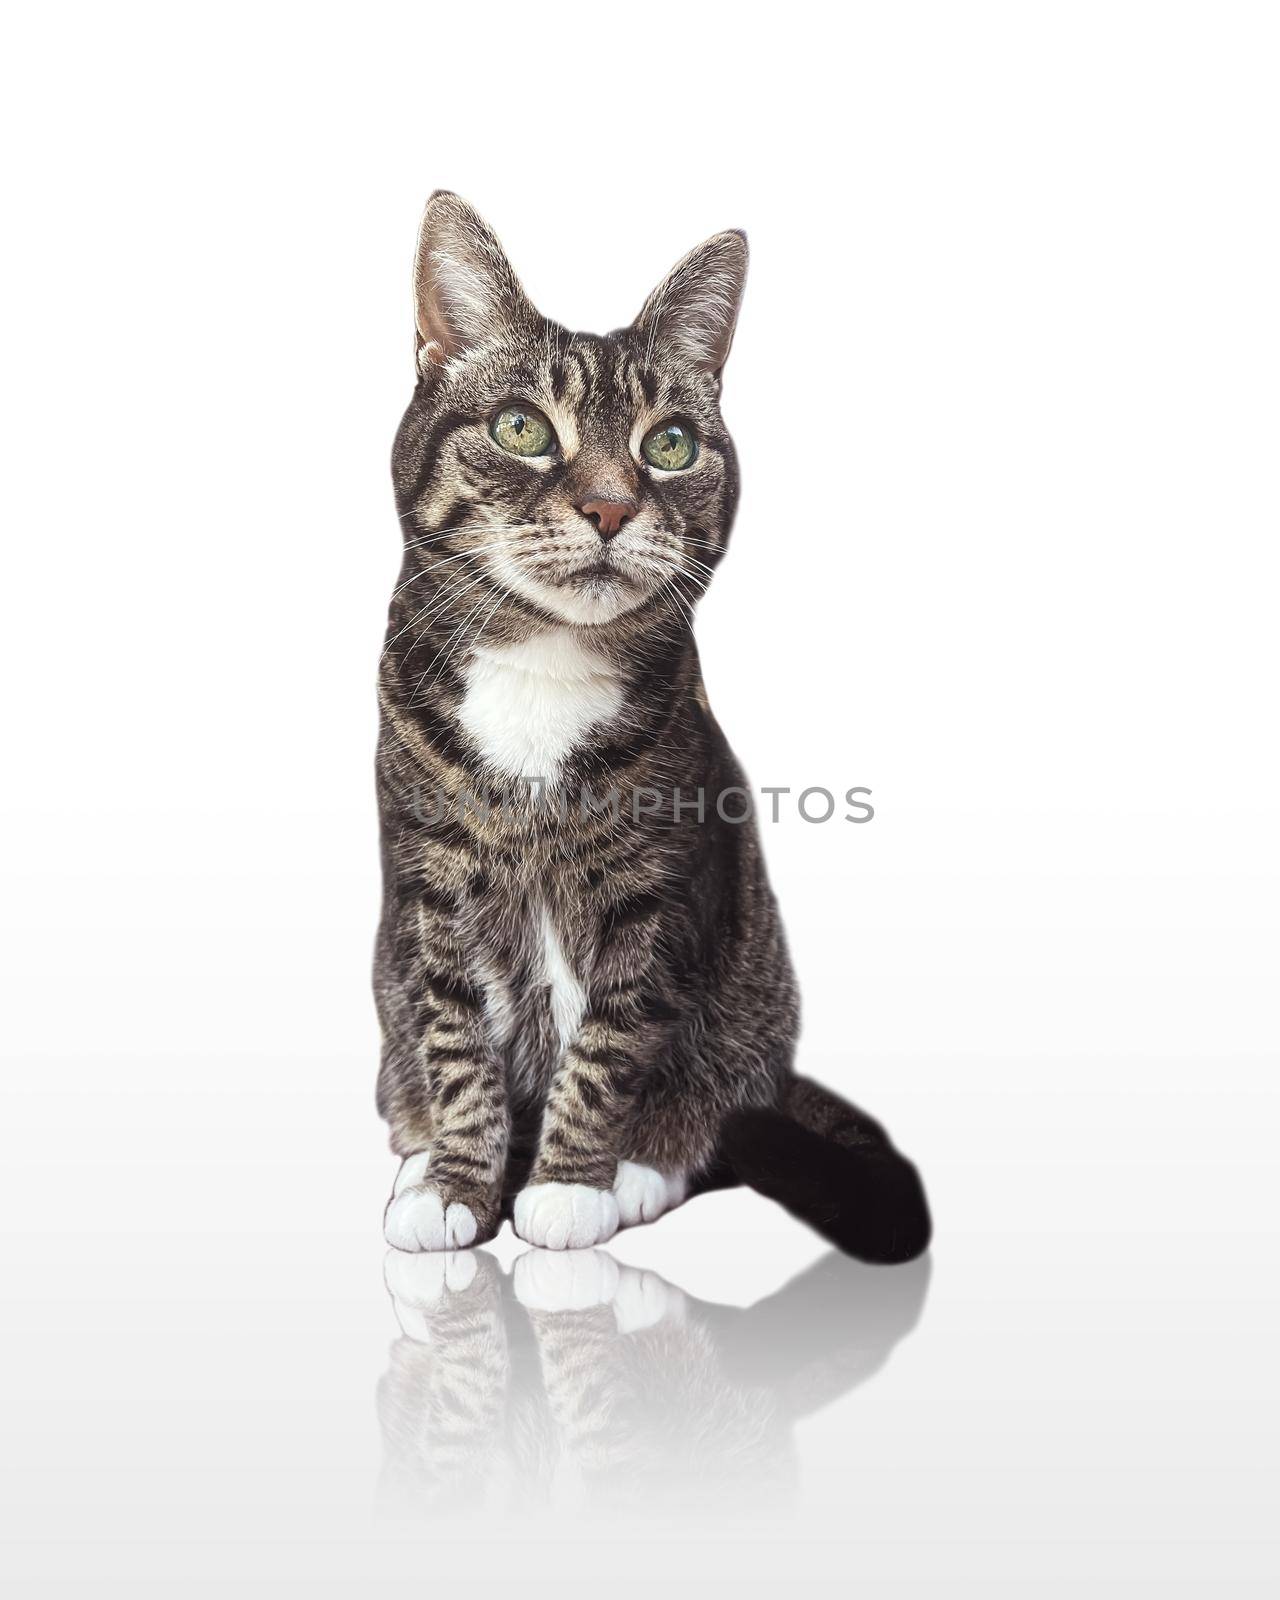 Beautiful female adult tabby cat posing on glossy white background, lovely adorable pet, studio portrait ad